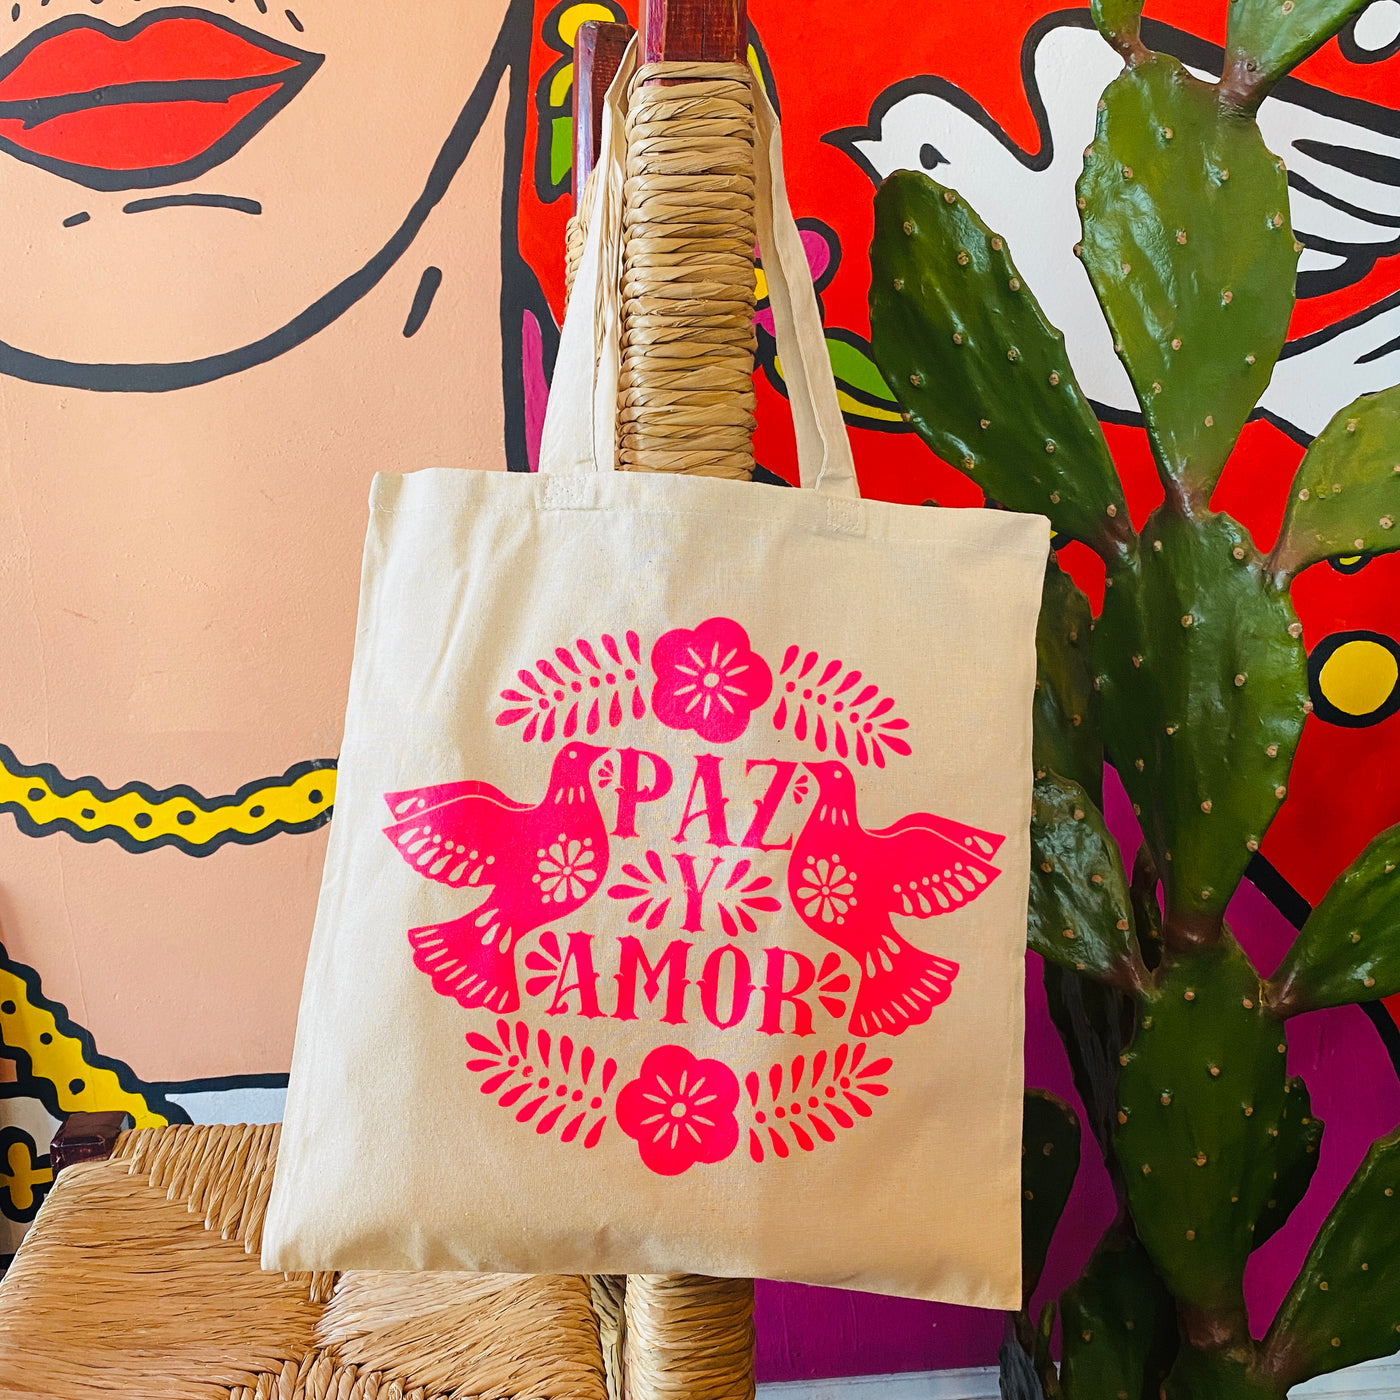 Natural colored tote bag with bright pink design of two doves and the words "Paz y amor" in the center.